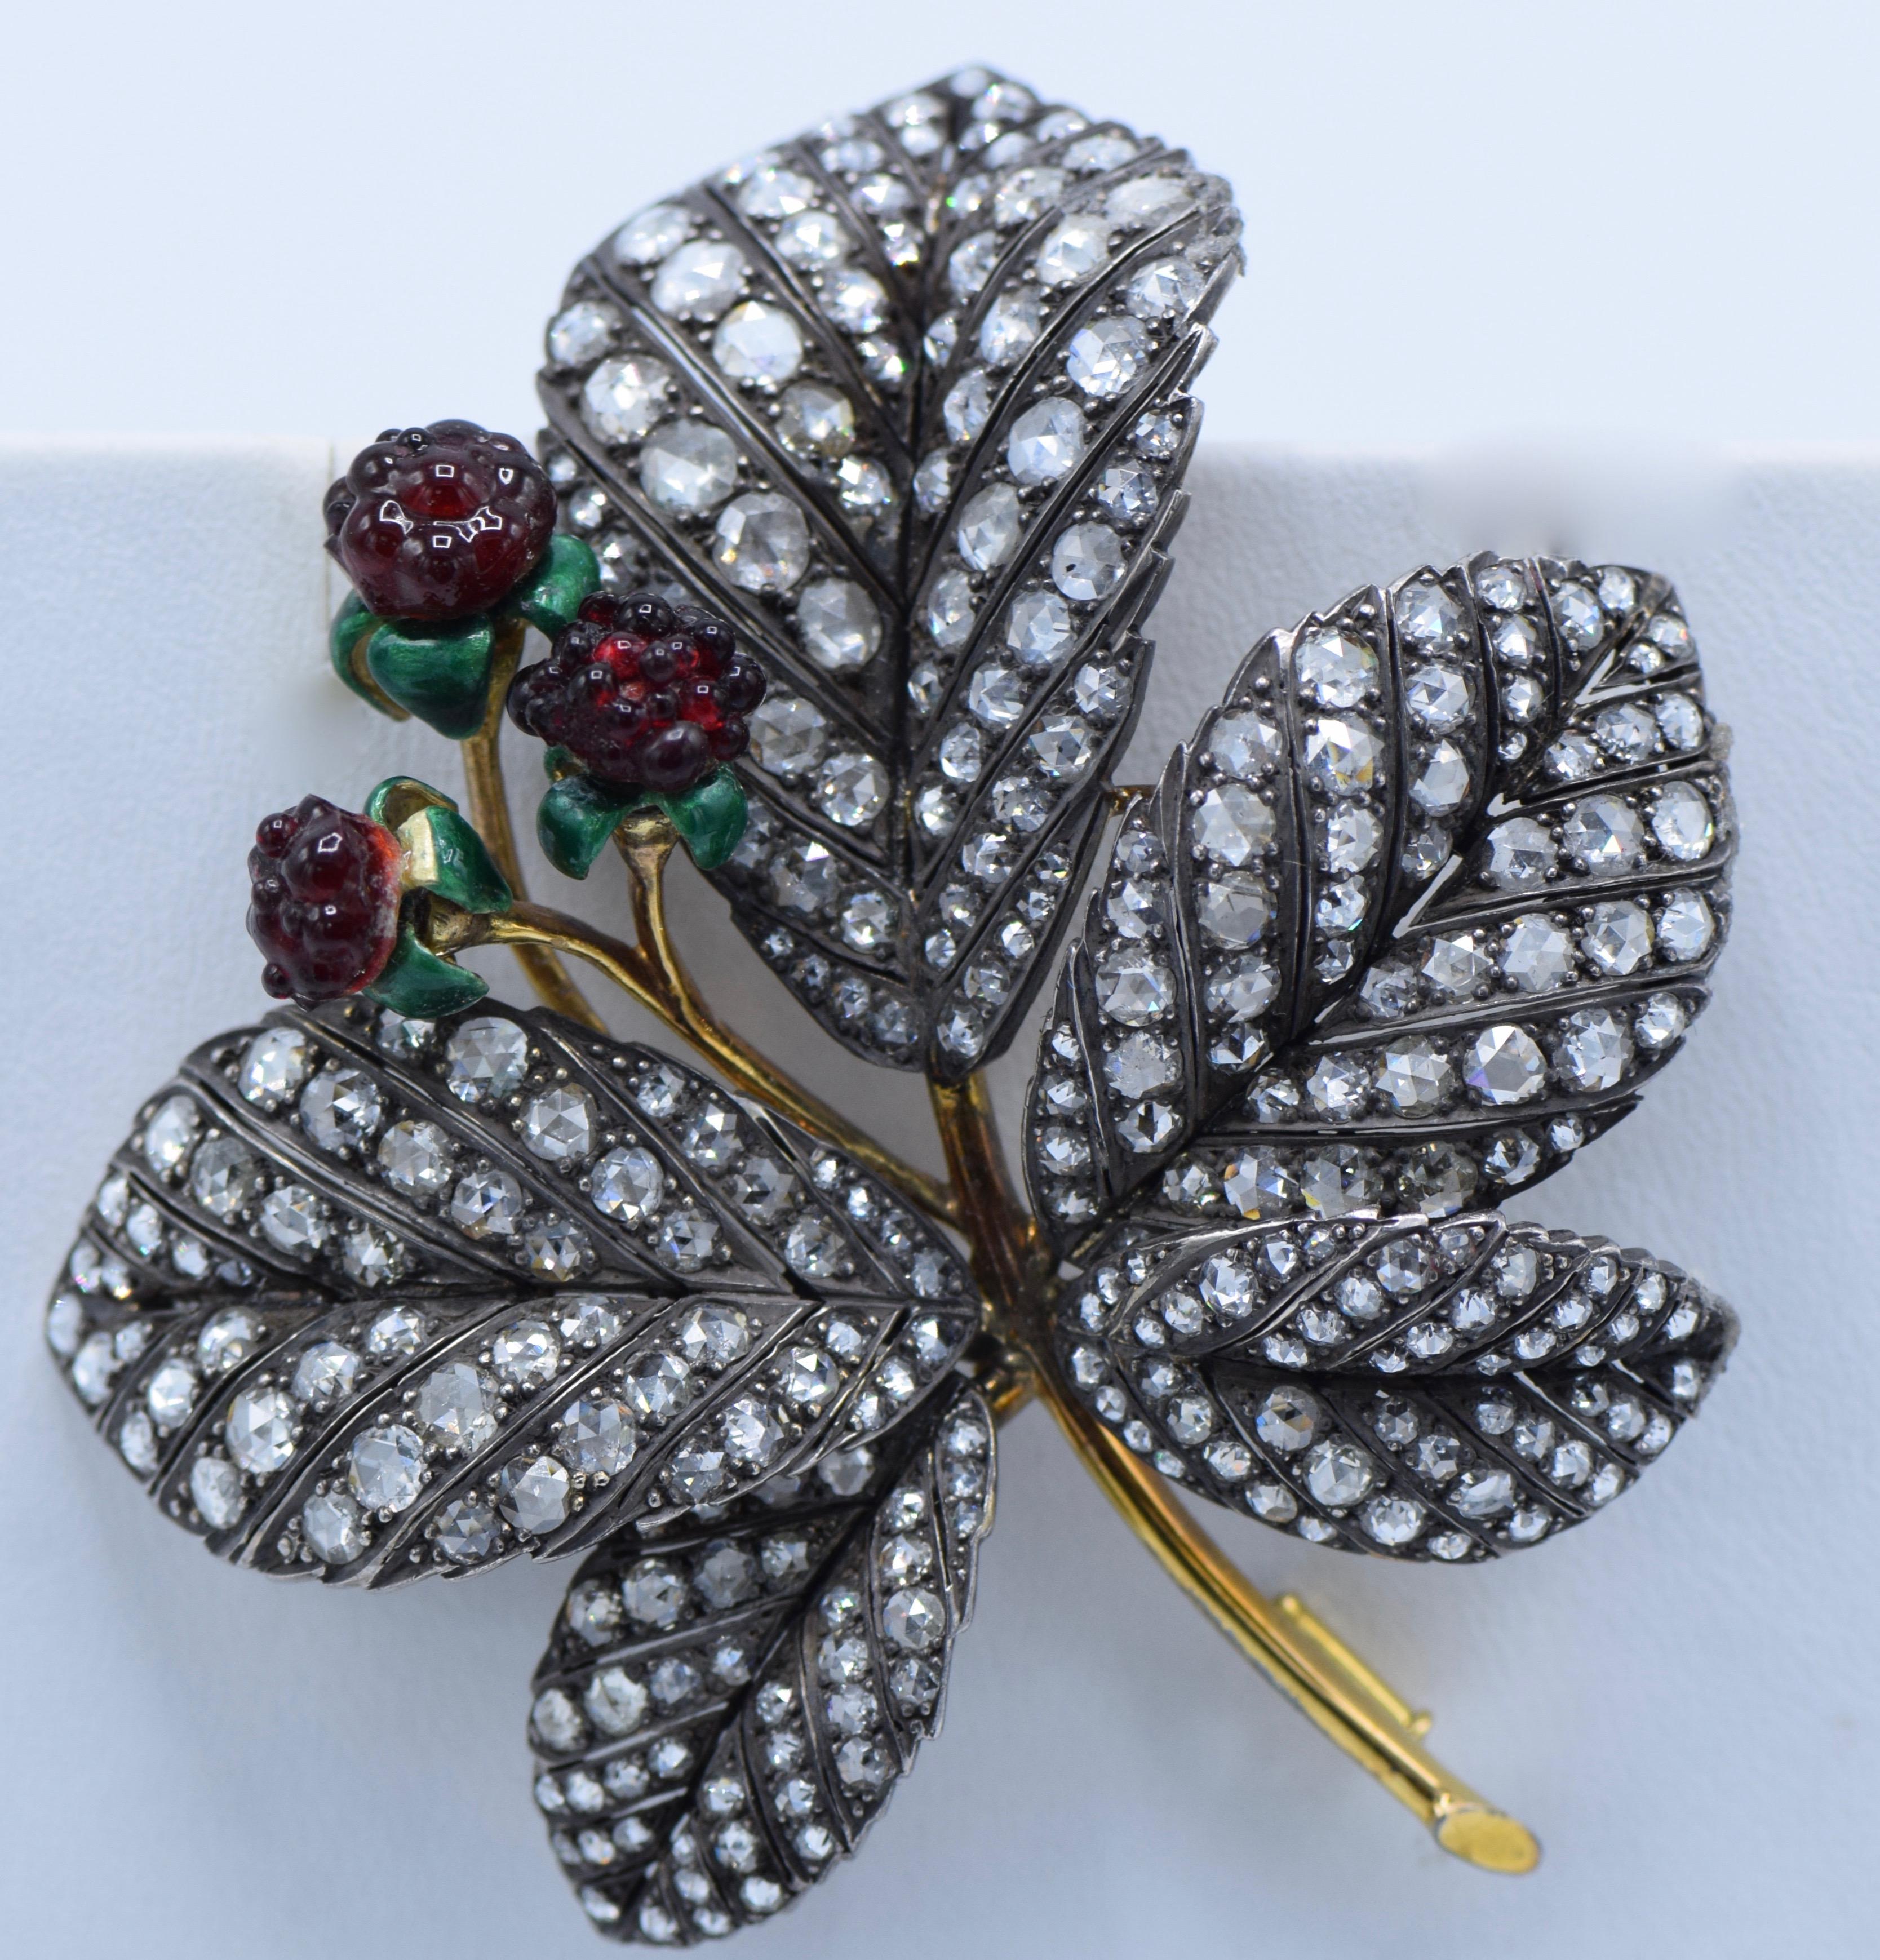 designed as leaf and enamel flower 

Late Victorian Diamond, Enameled and Gold Raspberry Brooch

Total Diamond weight: 10 carats

A cluster of three molded red glass berries with curling green enameled calyx,  TW., silver-topped yellow gold leaves.